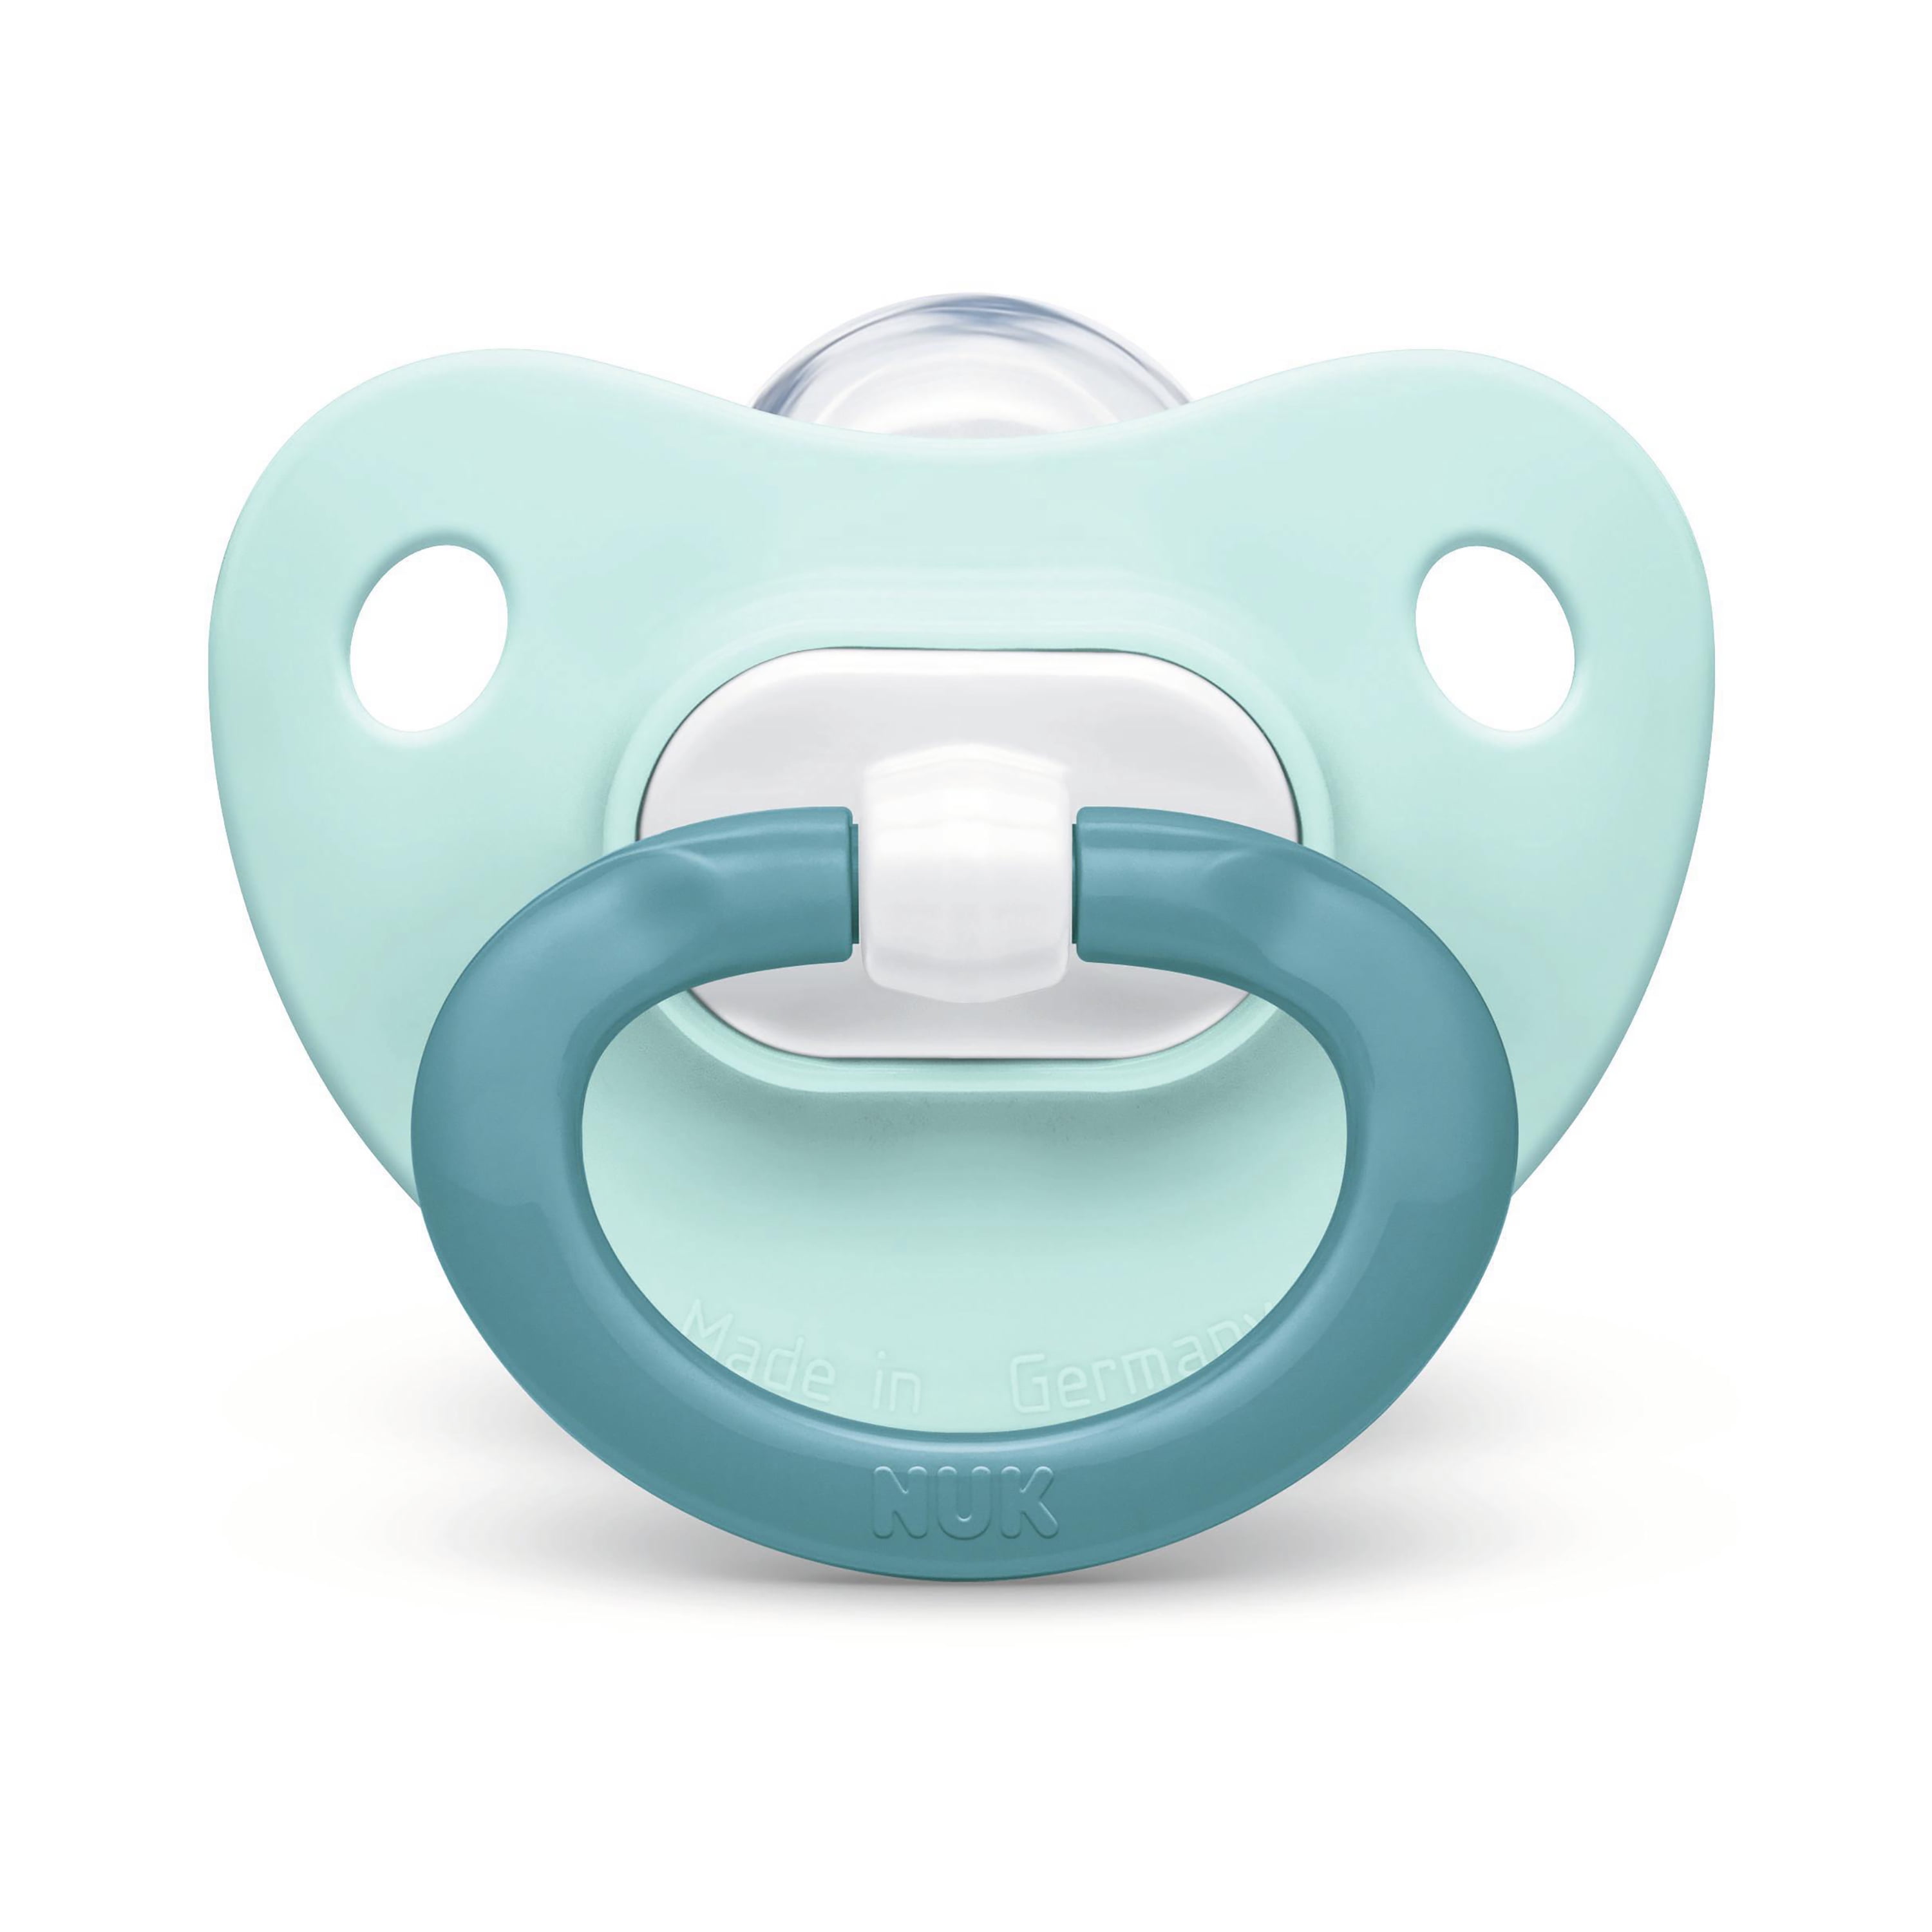 Baby Pack Of 2 Nuk Orthodontic Pacifier Bundle Boy 0-6 Months New Gift 